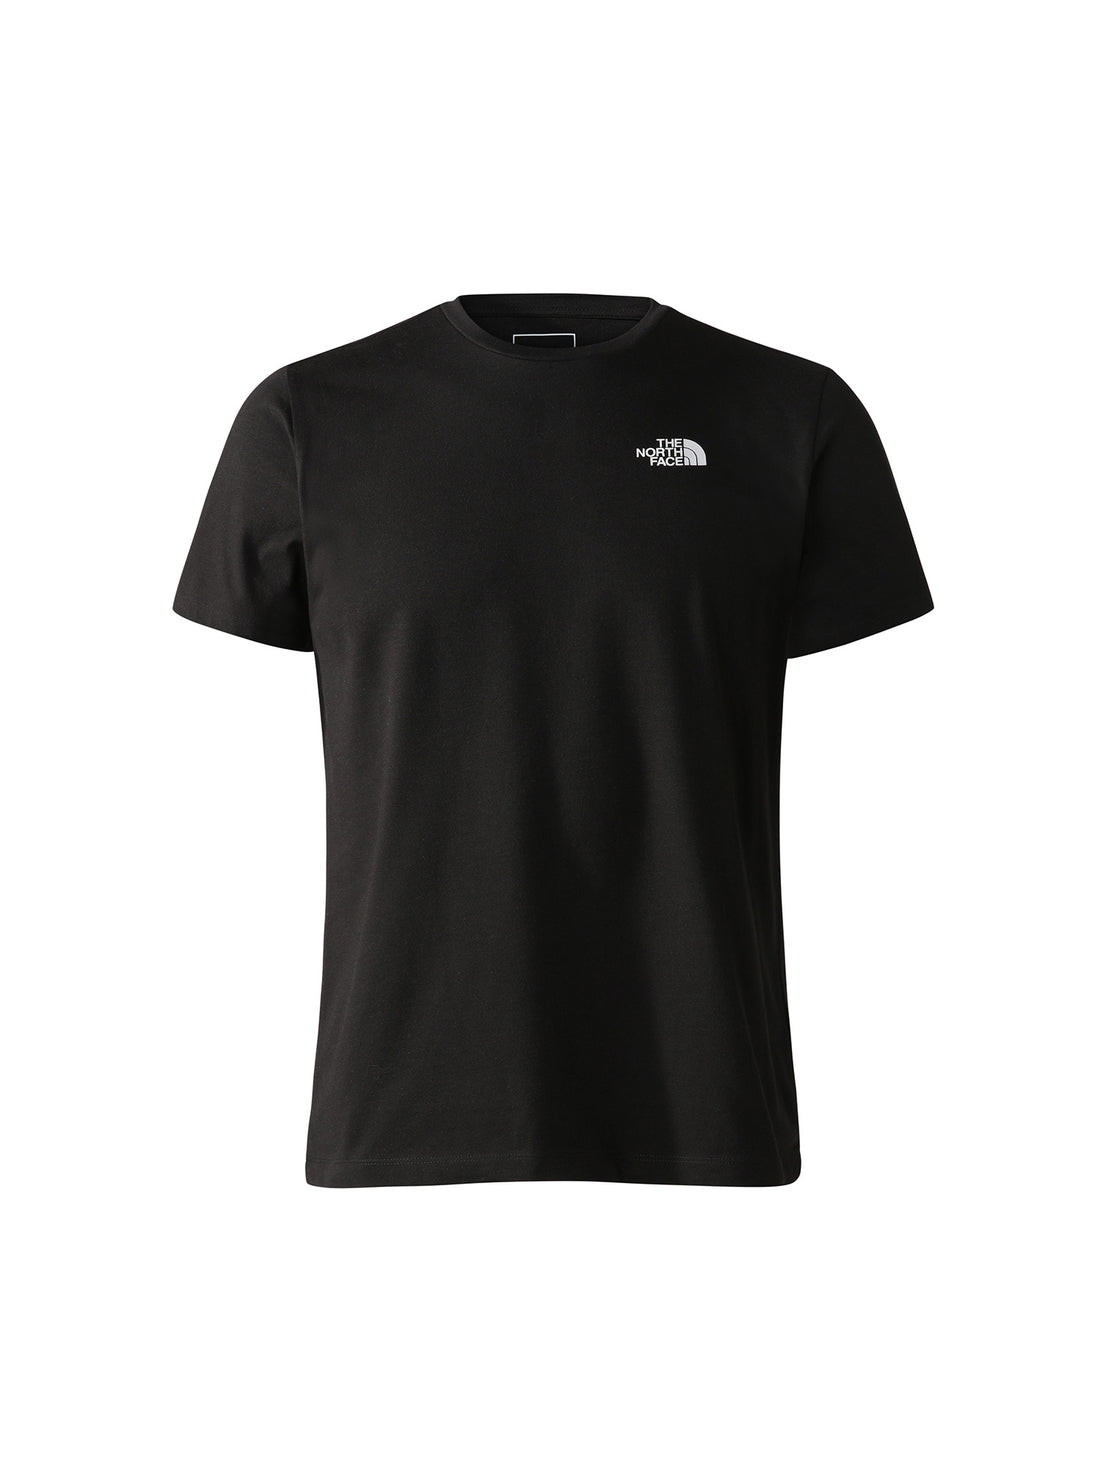 T-shirt Nero The North Face